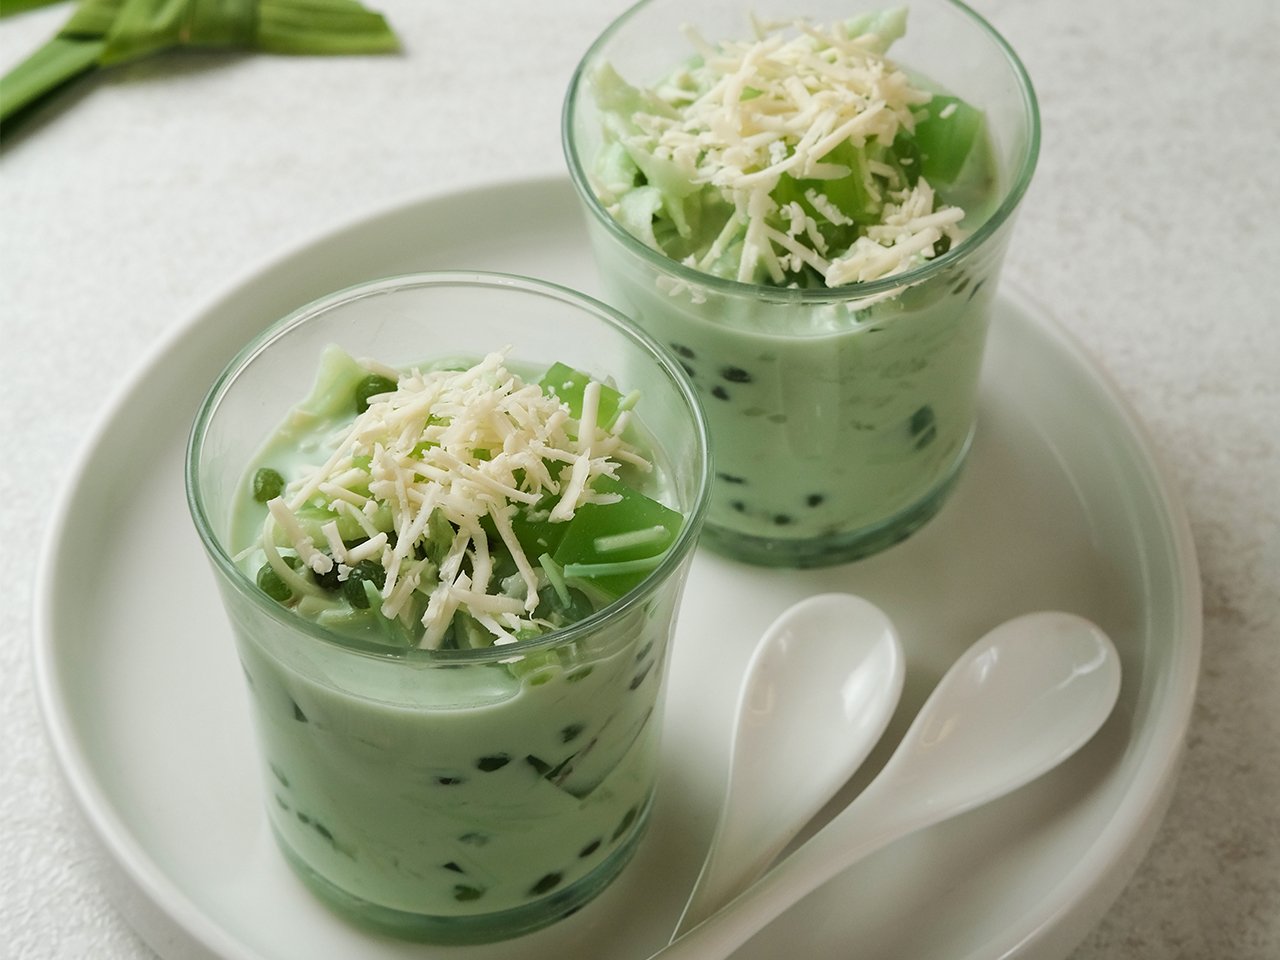 Buko pandan salad in two glasses on a plate